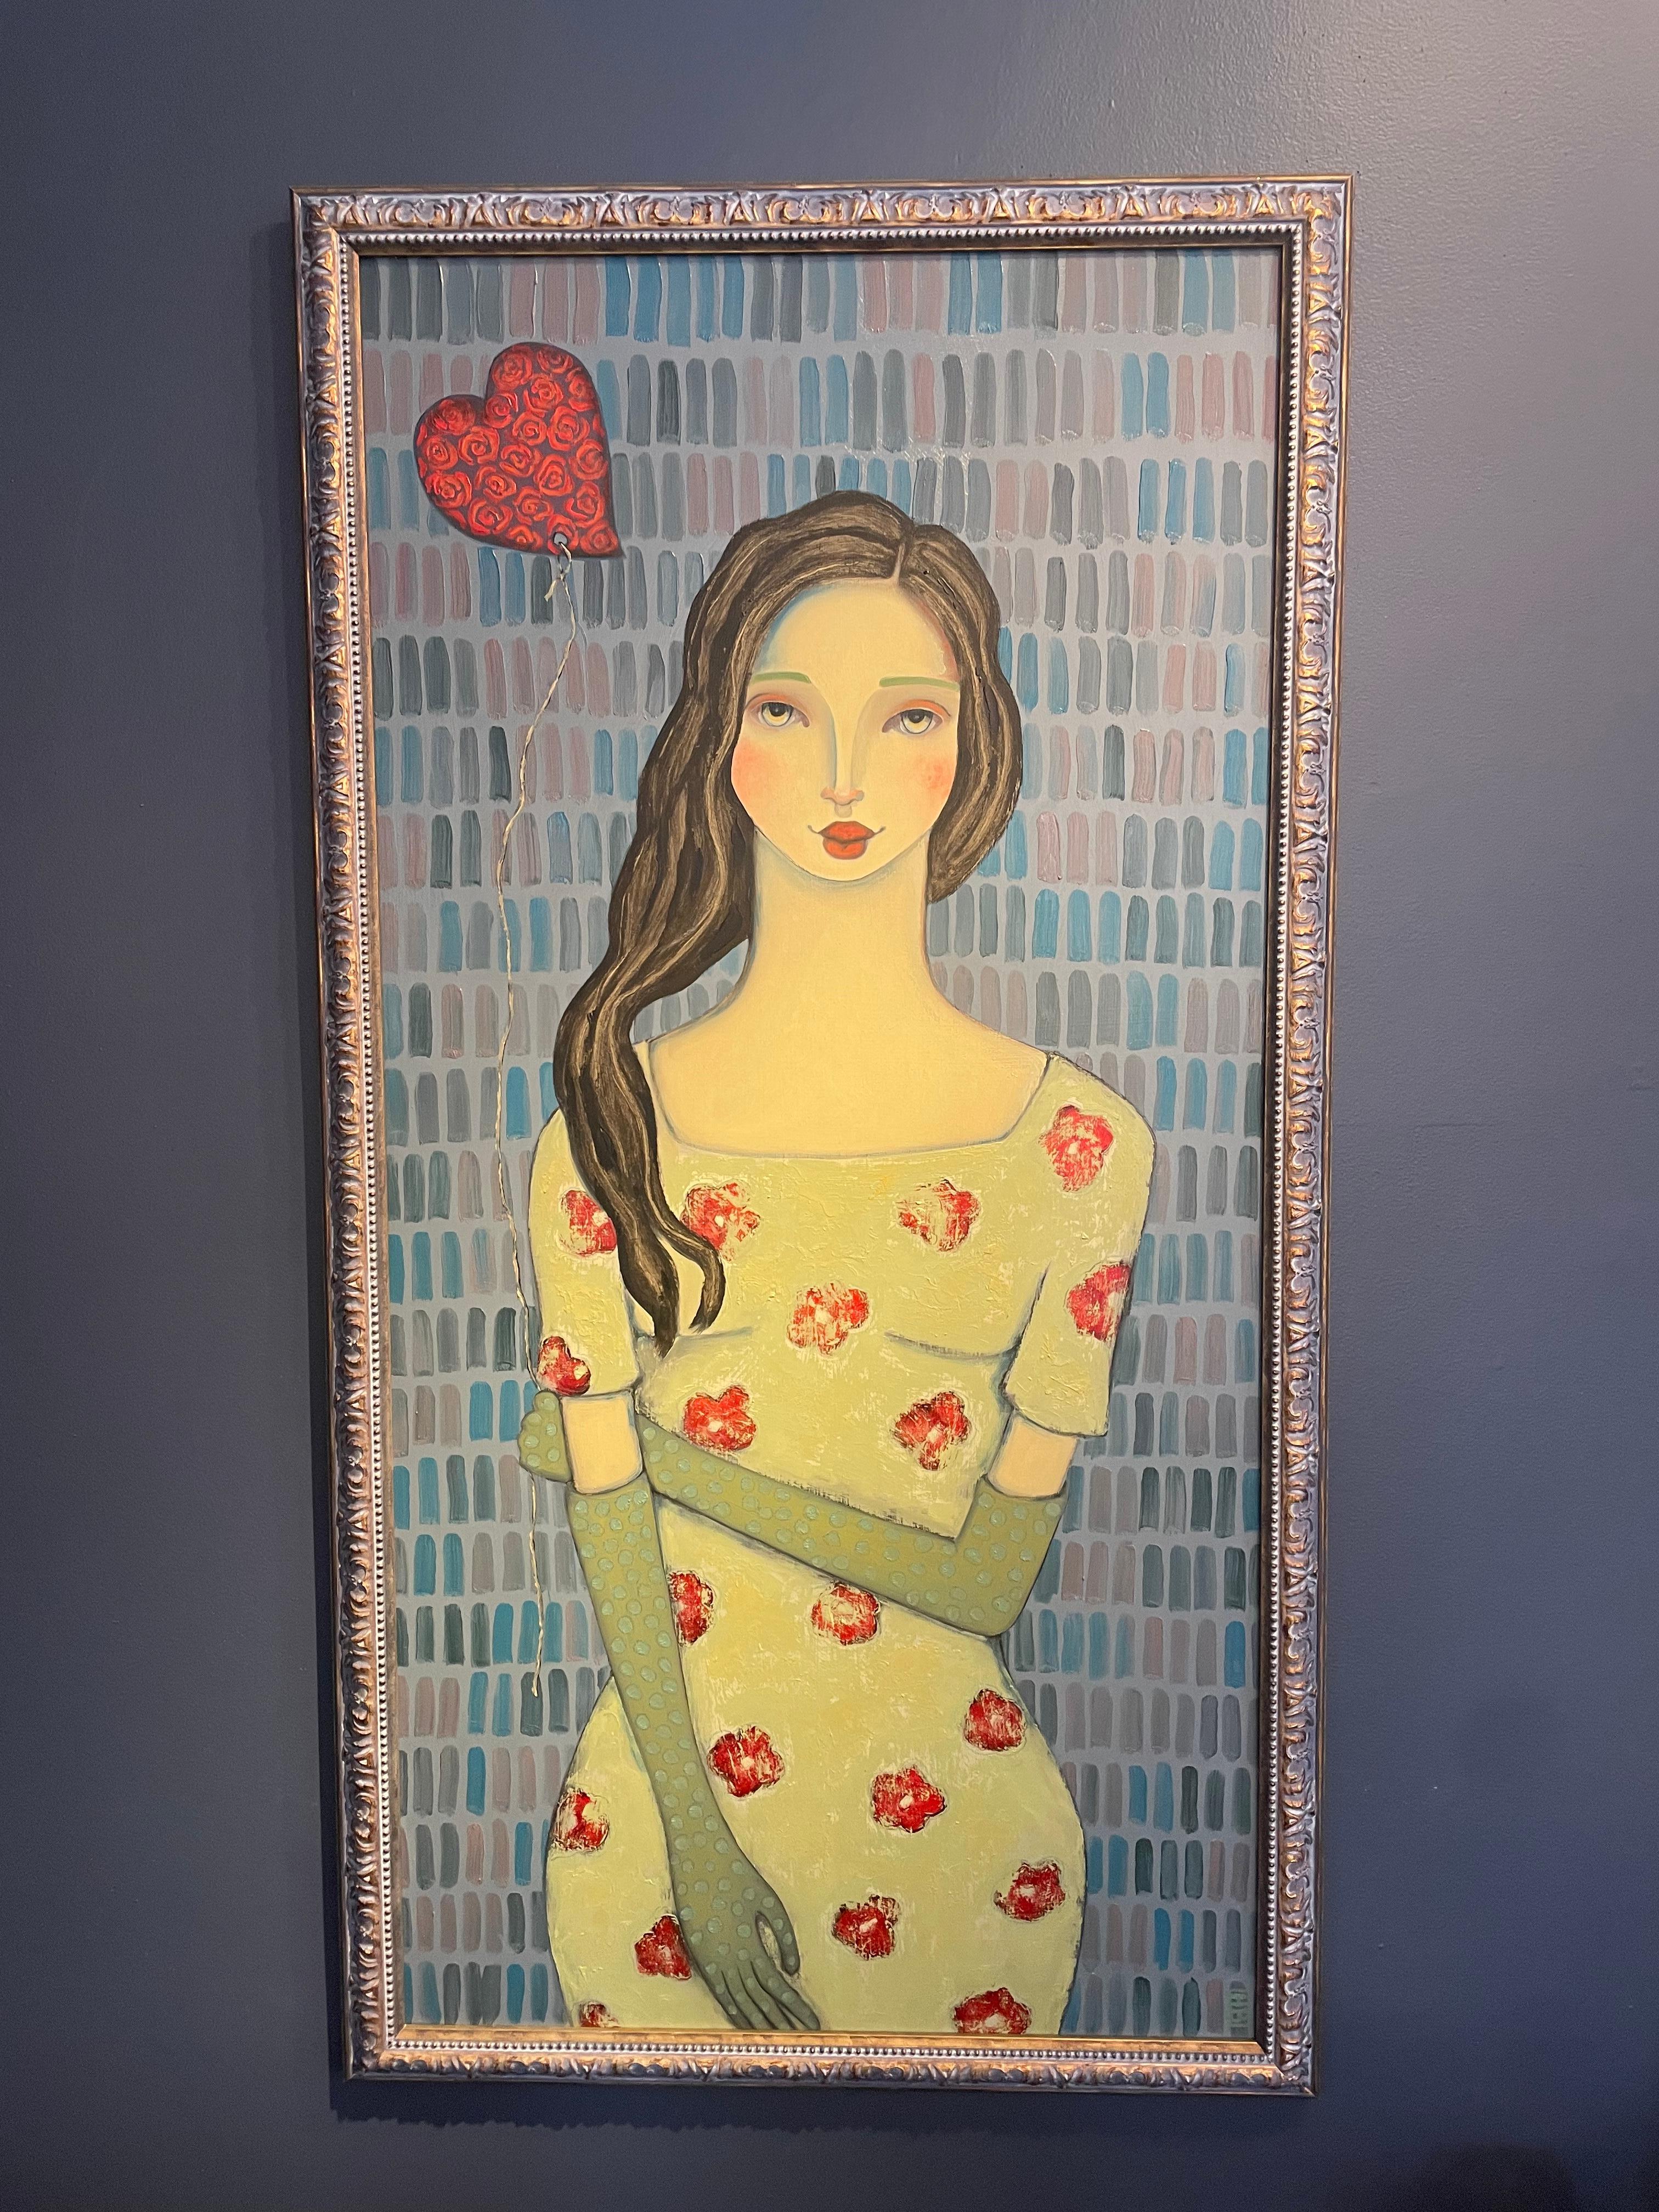 Julie Has a Big Heart  - Painting by Heather Barron